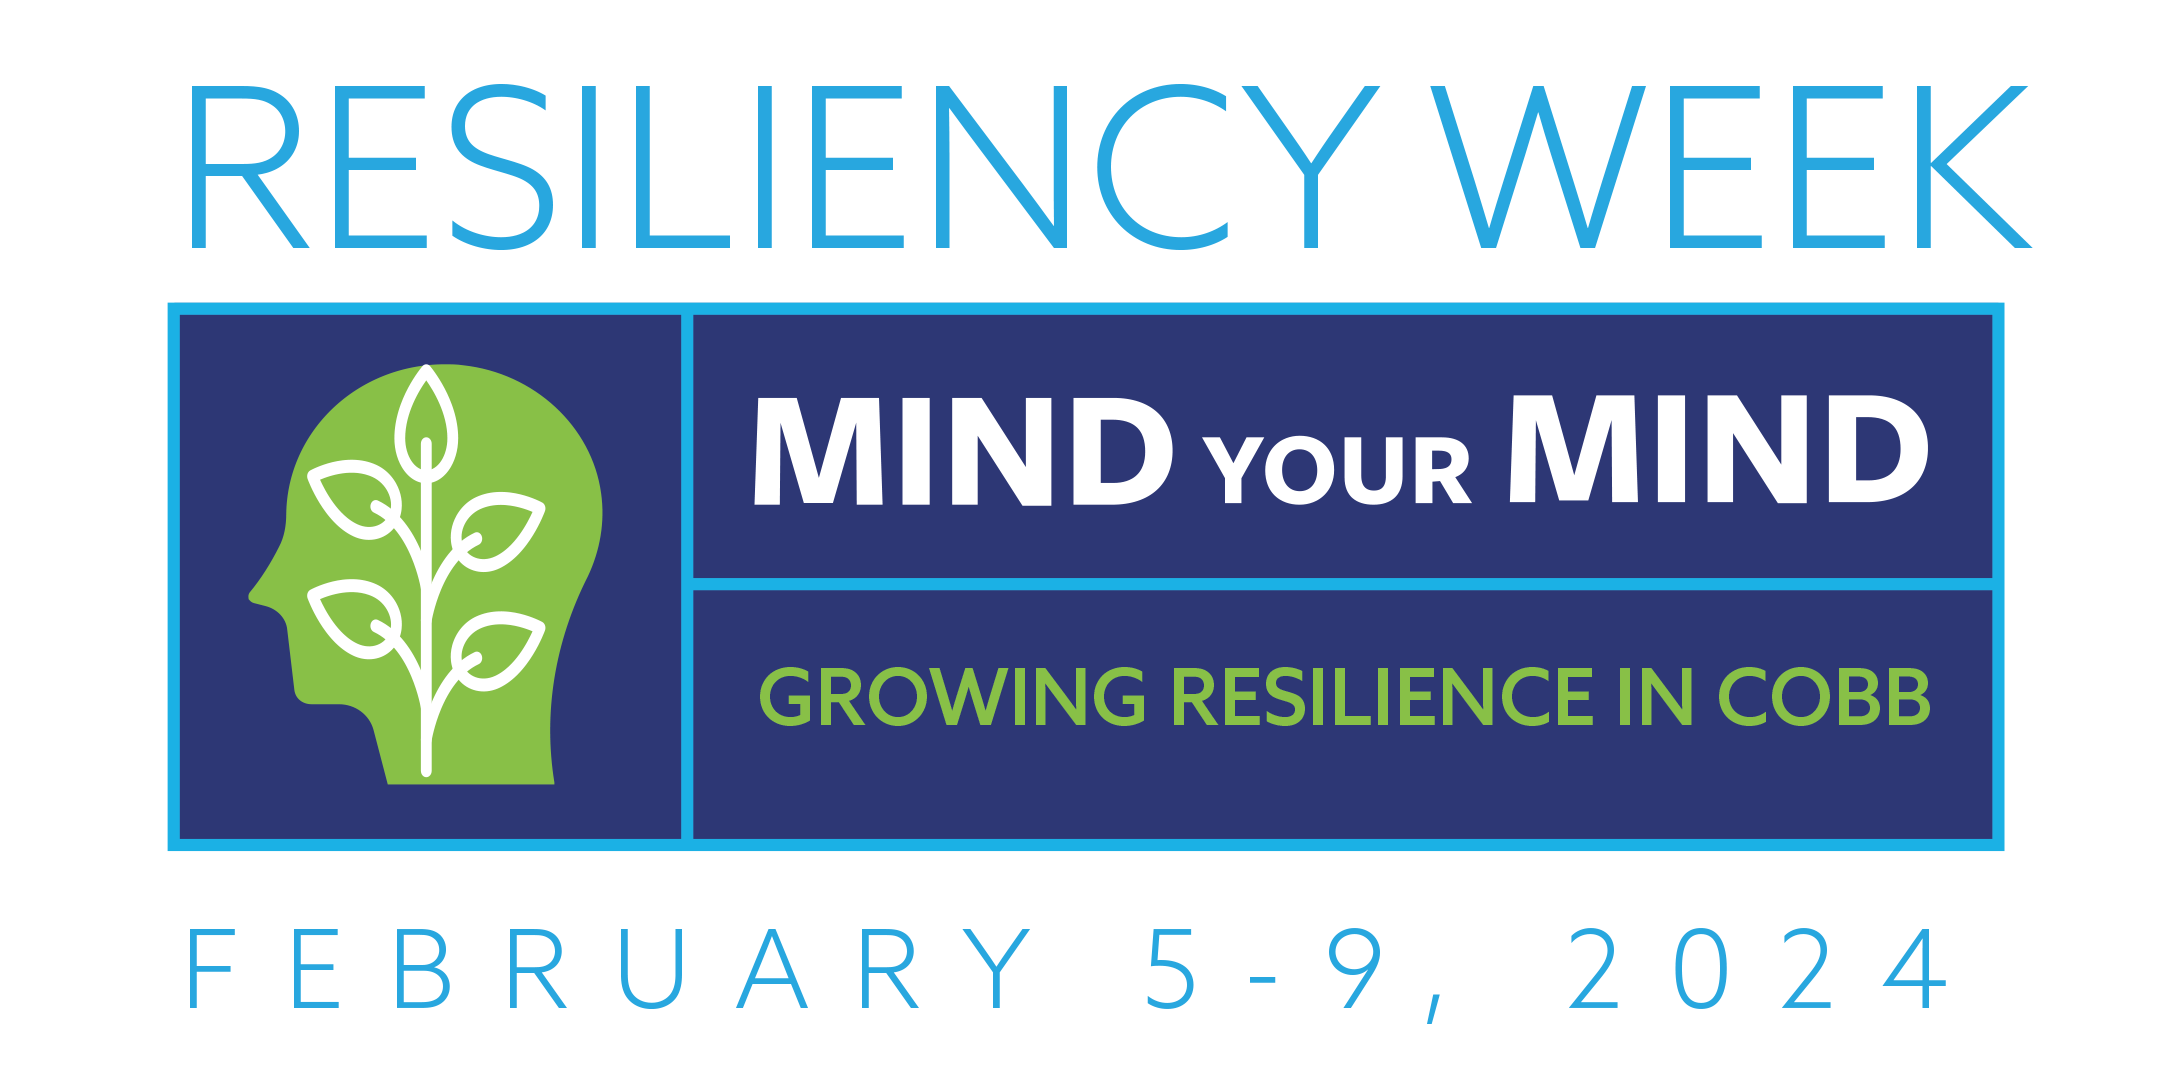 Resiliency Week | Mind Your Mind | Growing Resilience in Cobb